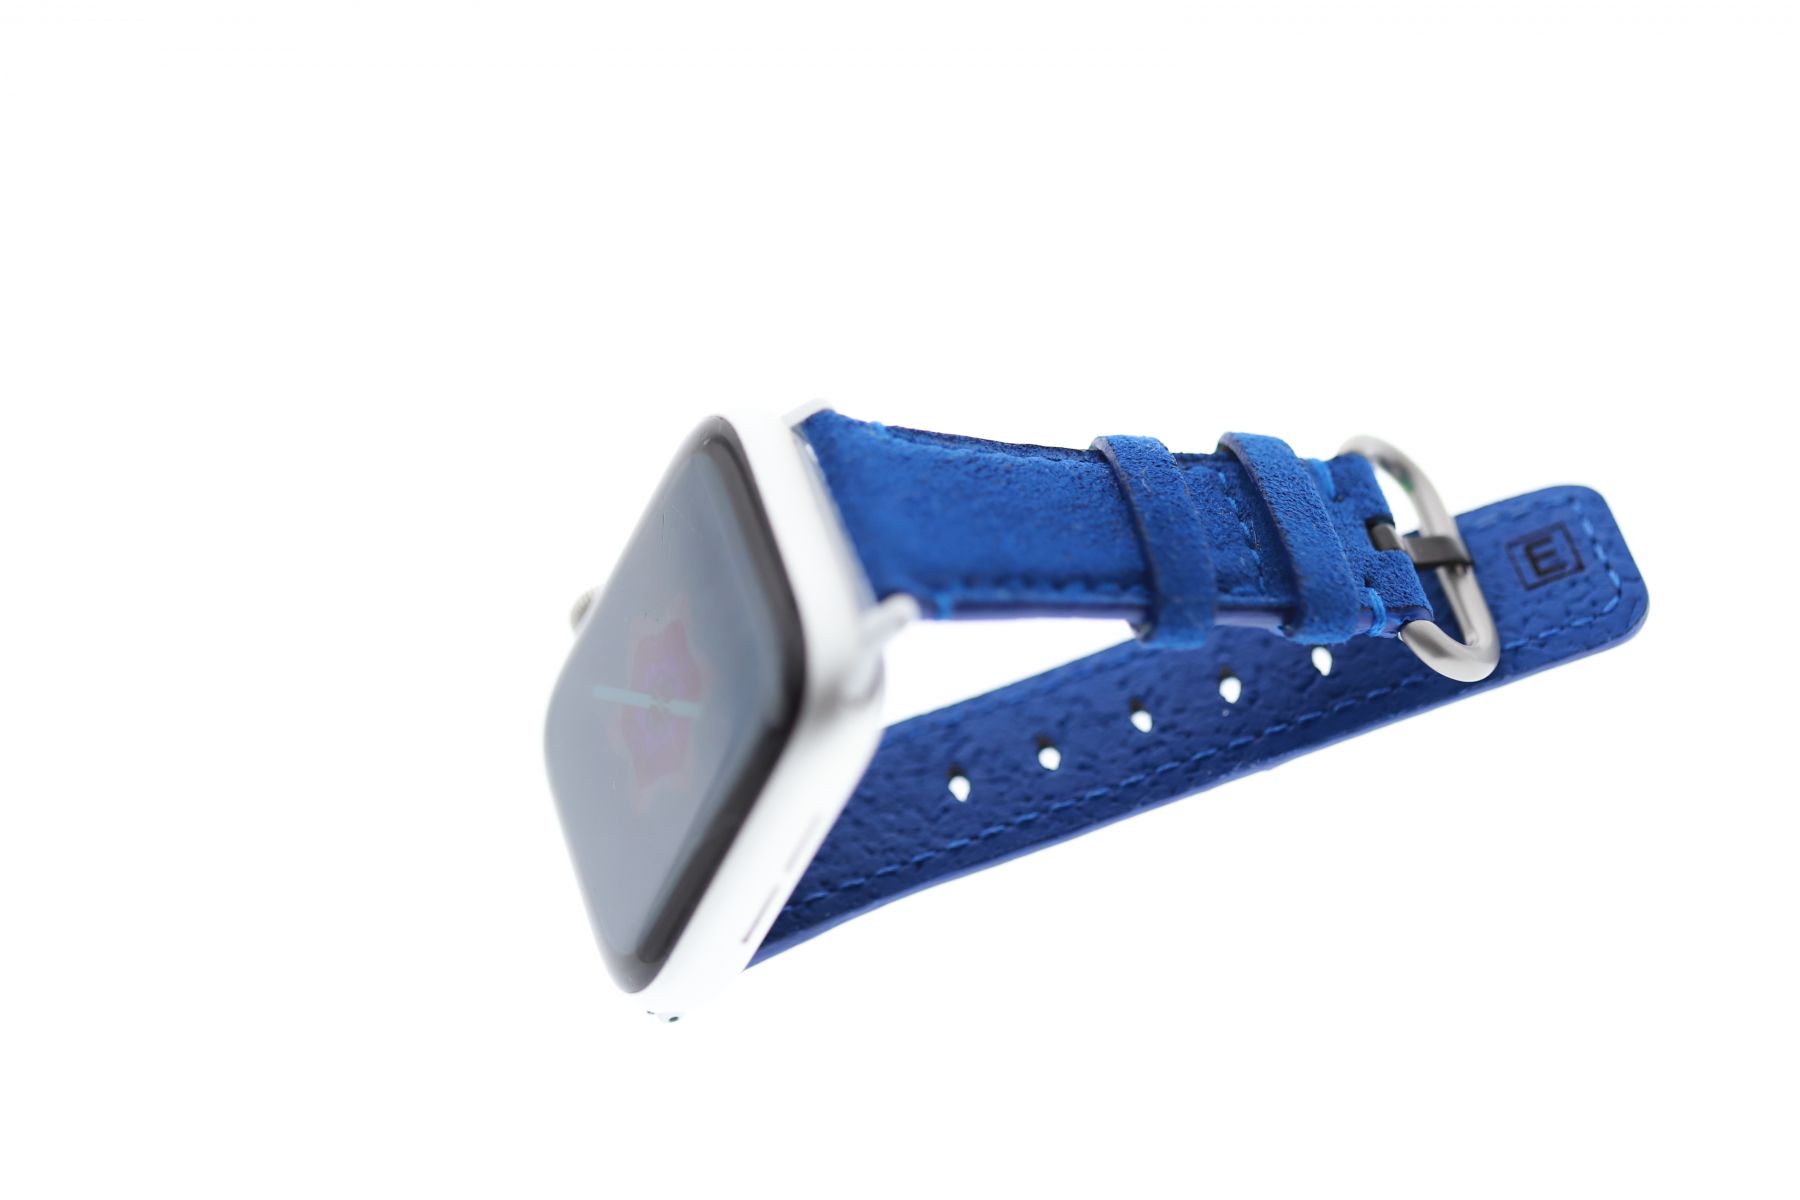 Band for Tiny Wrist (for All Apple Watch sizes) in BALTIC BLUE Alcantara. Kids Collection